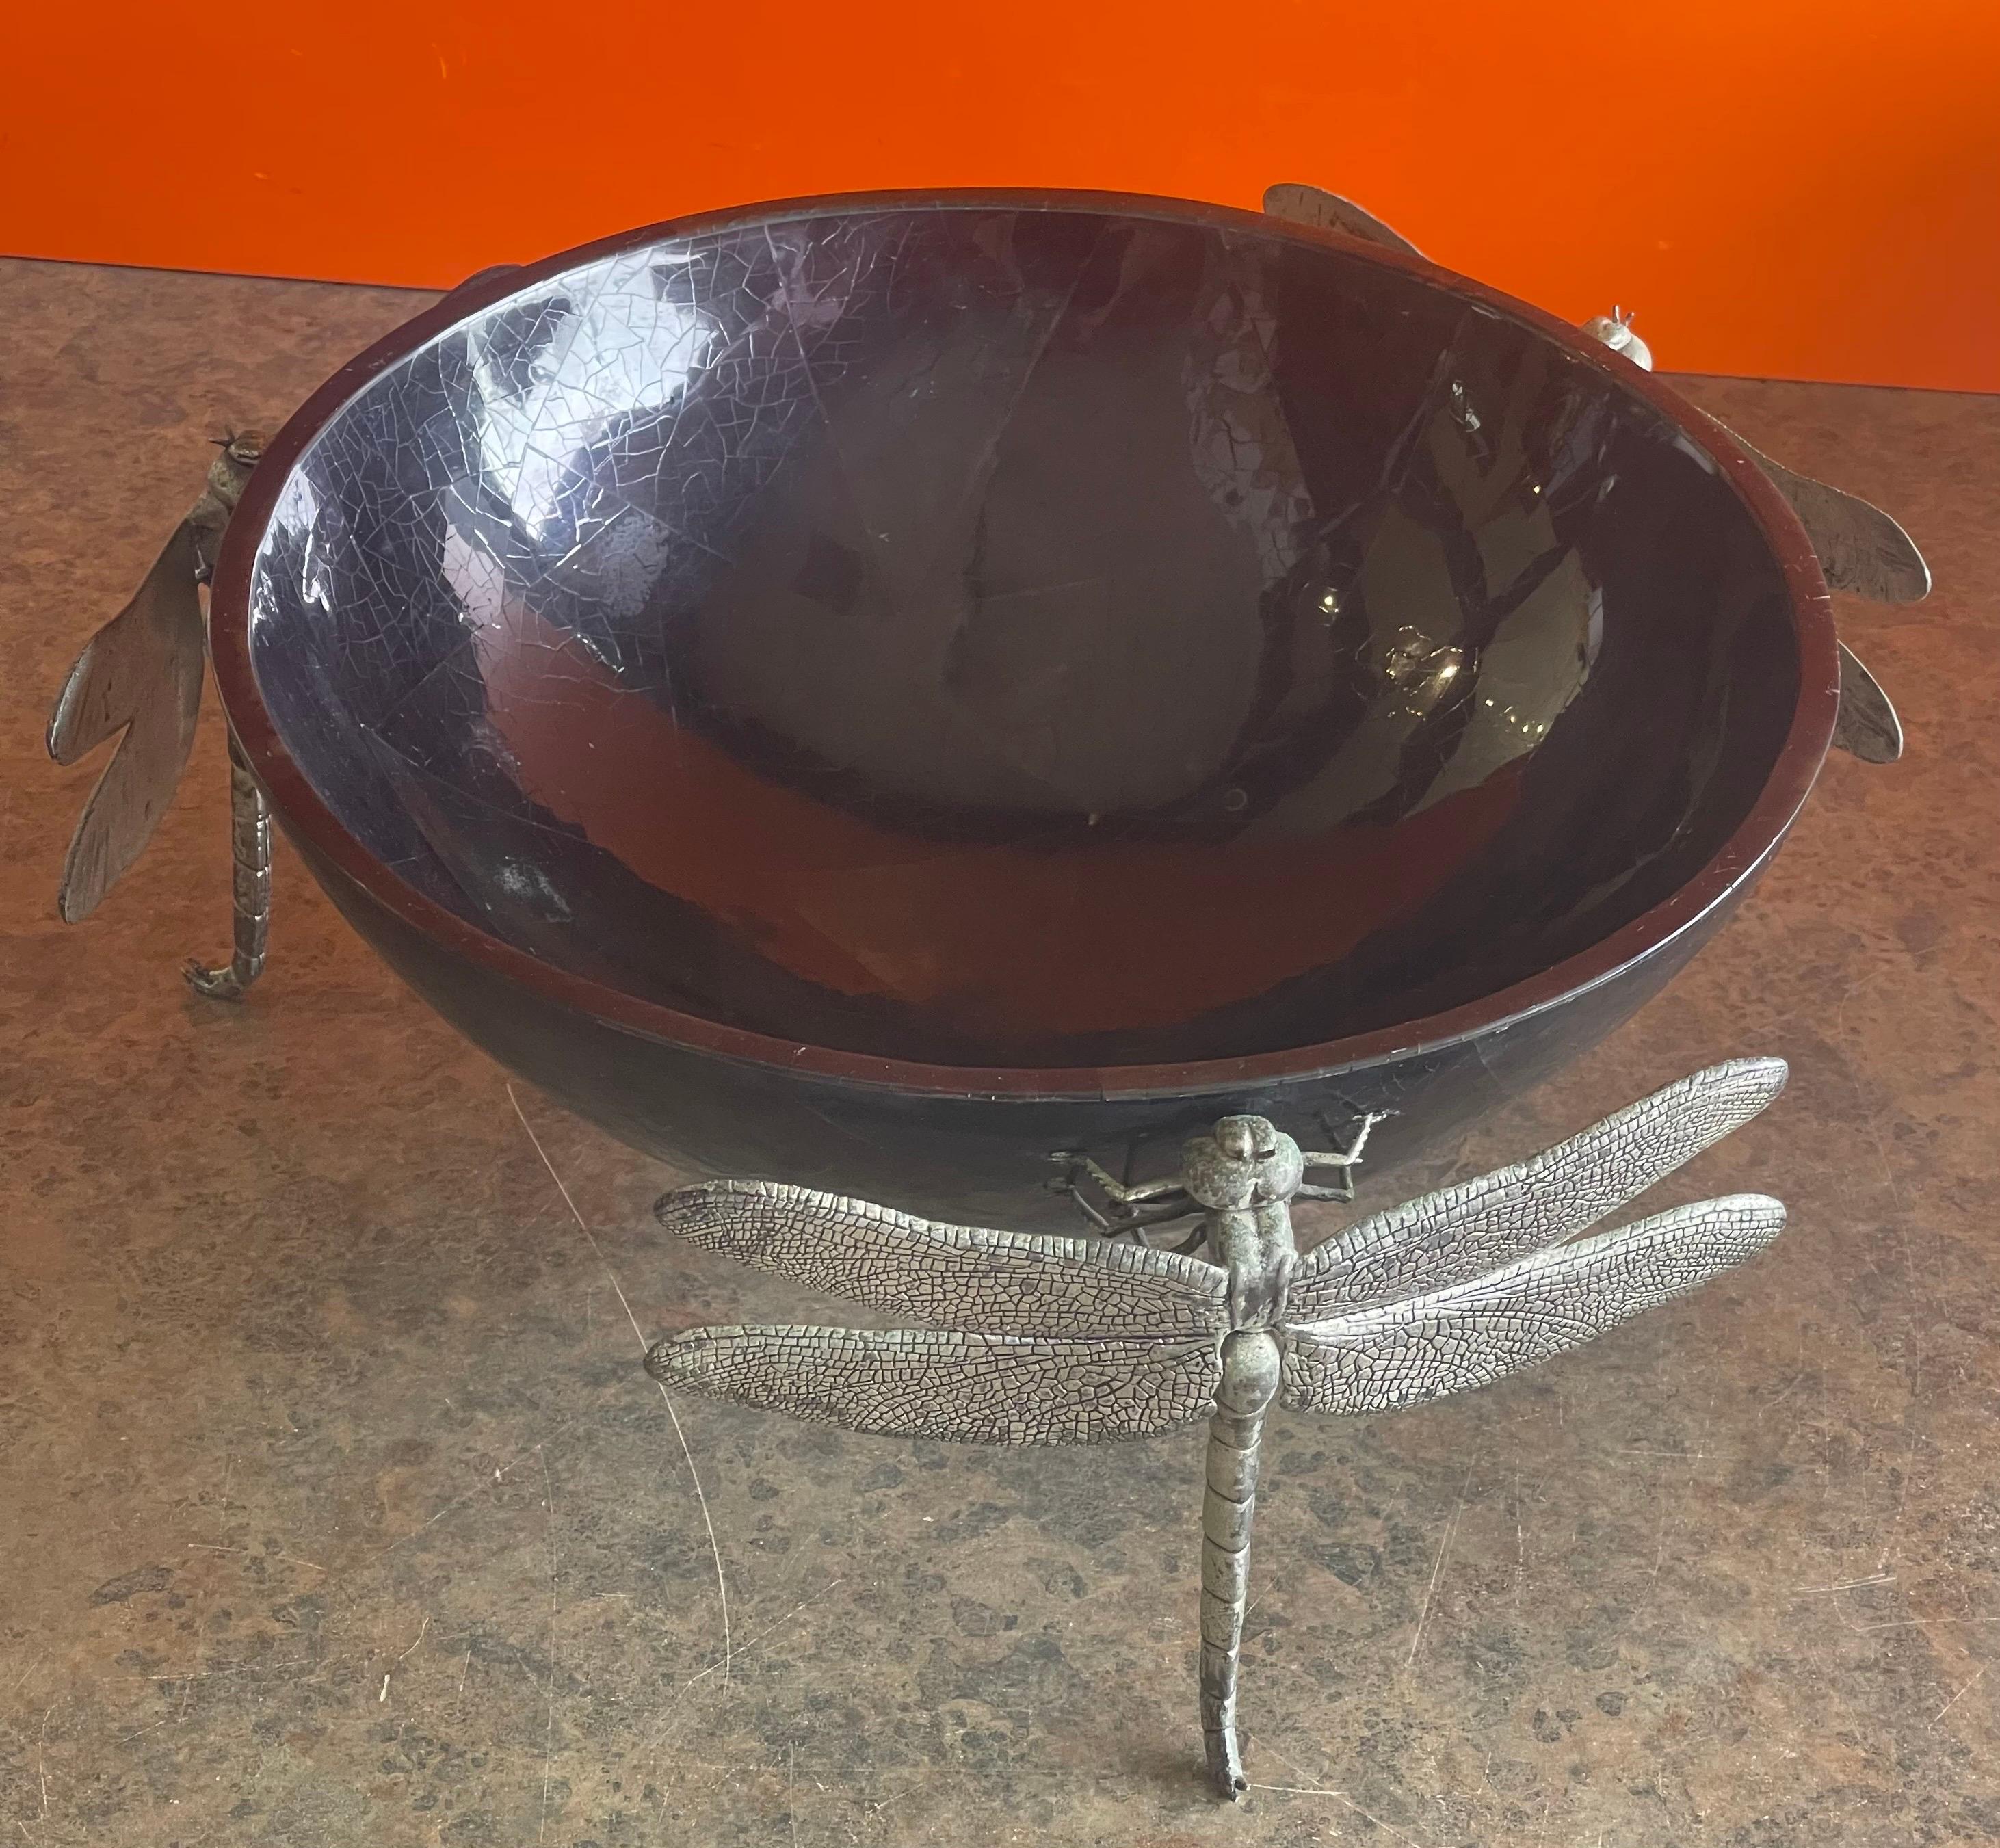 Large Black Pen Shell Centerpiece Bowl with Dragonfly Feet 2